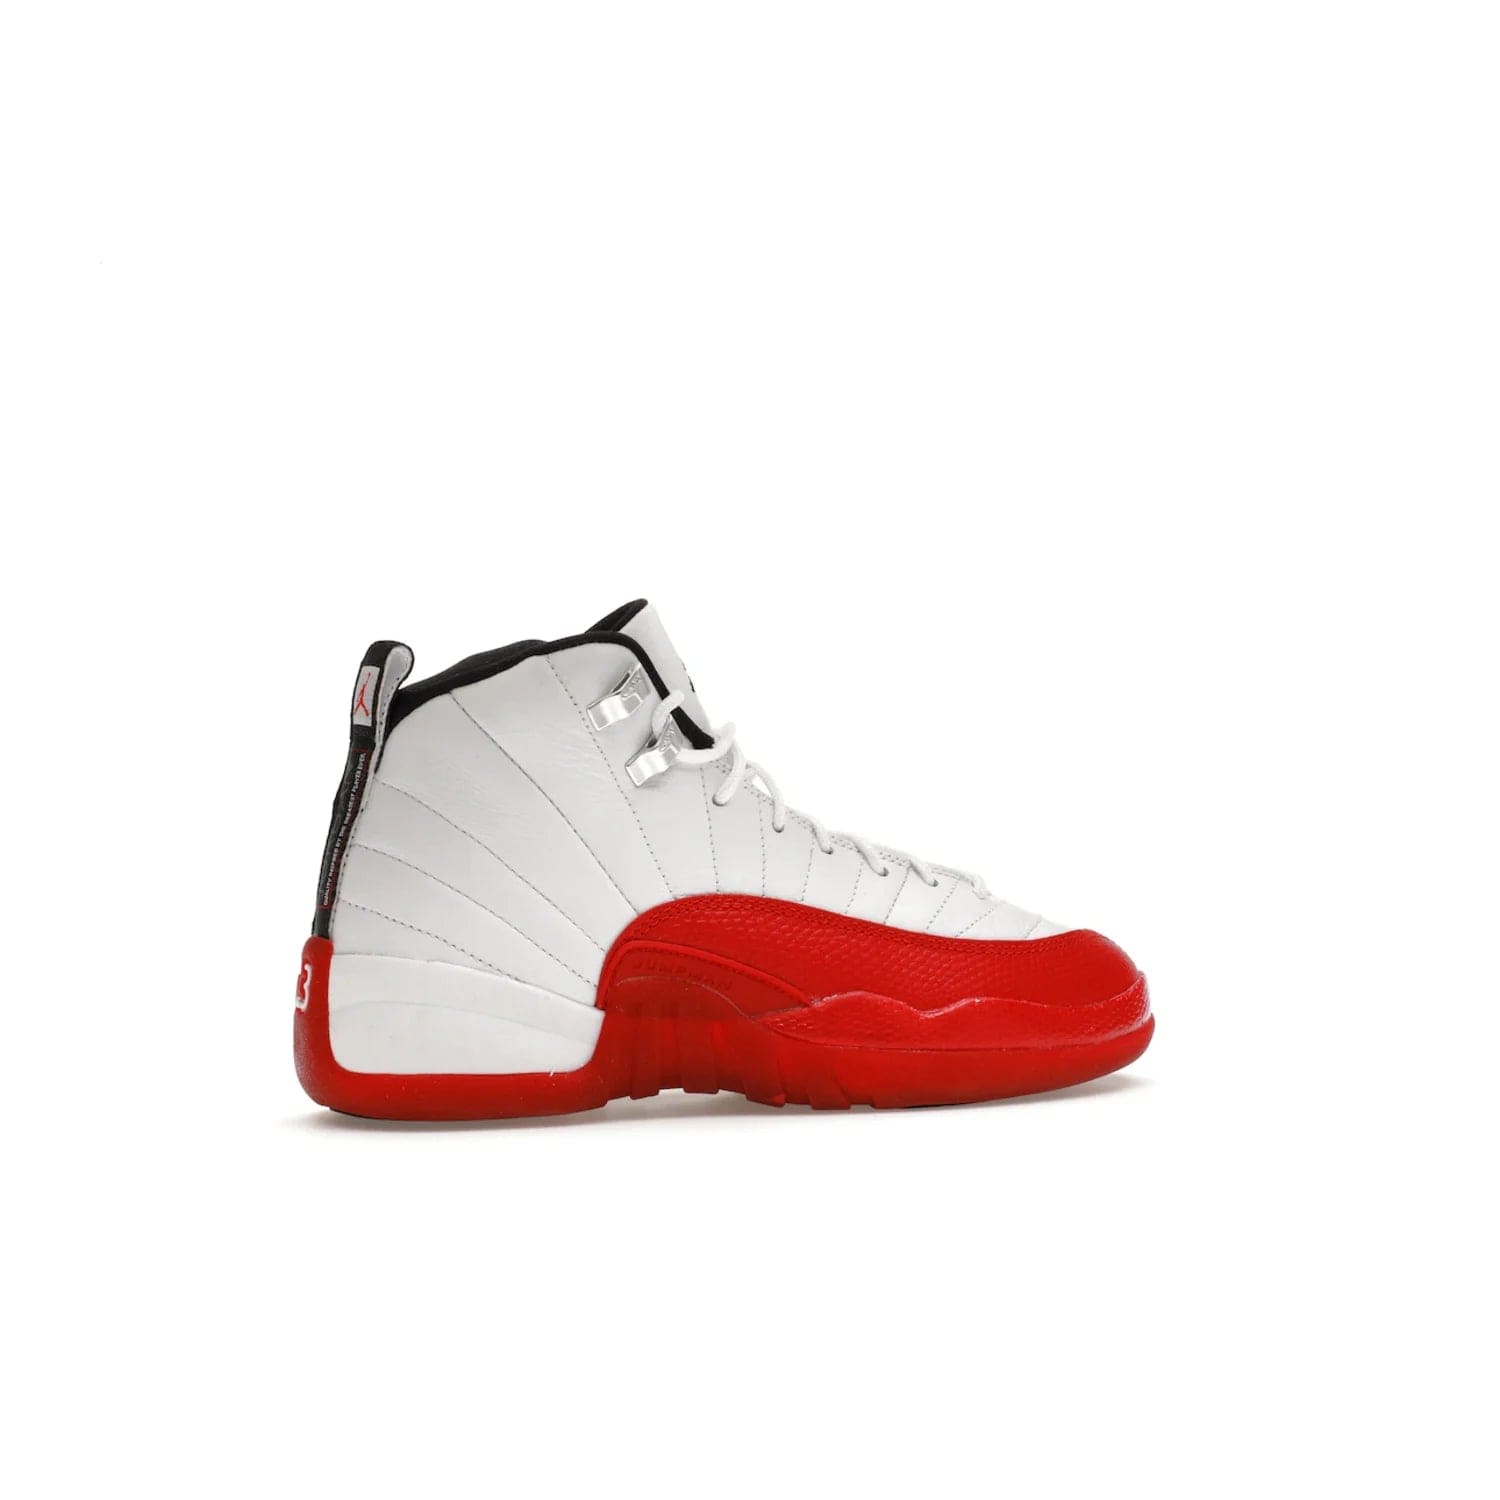 Jordan 12 Retro Cherry (2023) (GS) - Image 35 - Only at www.BallersClubKickz.com - Grab the Jordan 12 Retro Cherry (2023) (GS) and show off your signature style with these iconic kicks. Dressed in White, Black and Varsity Red, these timeless kicks are sure to turn heads. Available October 28, 2023.